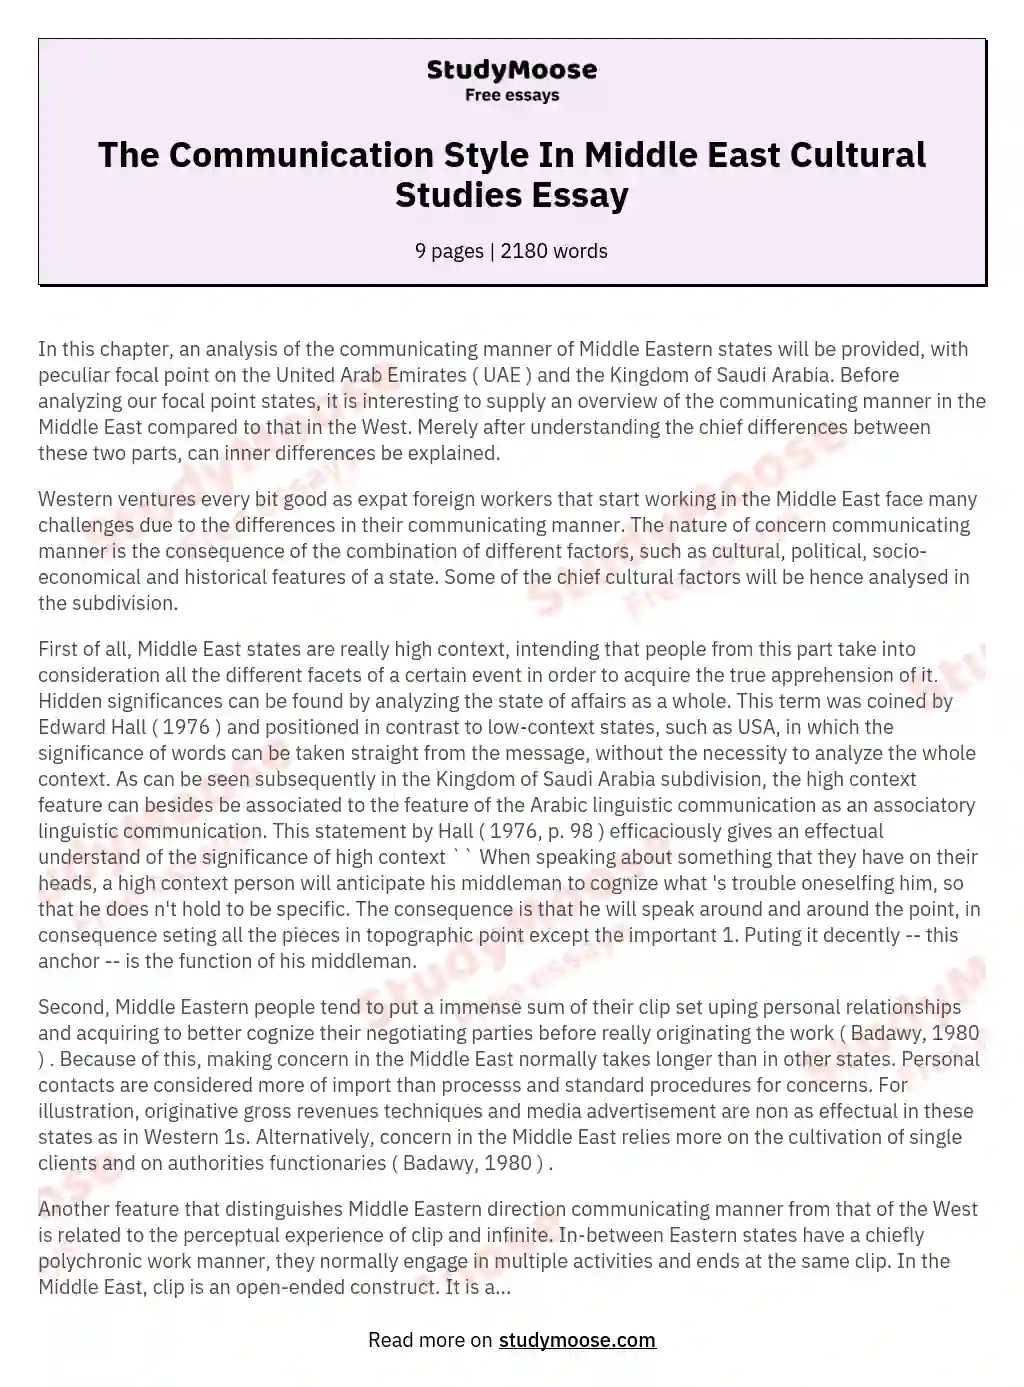 The Communication Style In Middle East Cultural Studies Essay